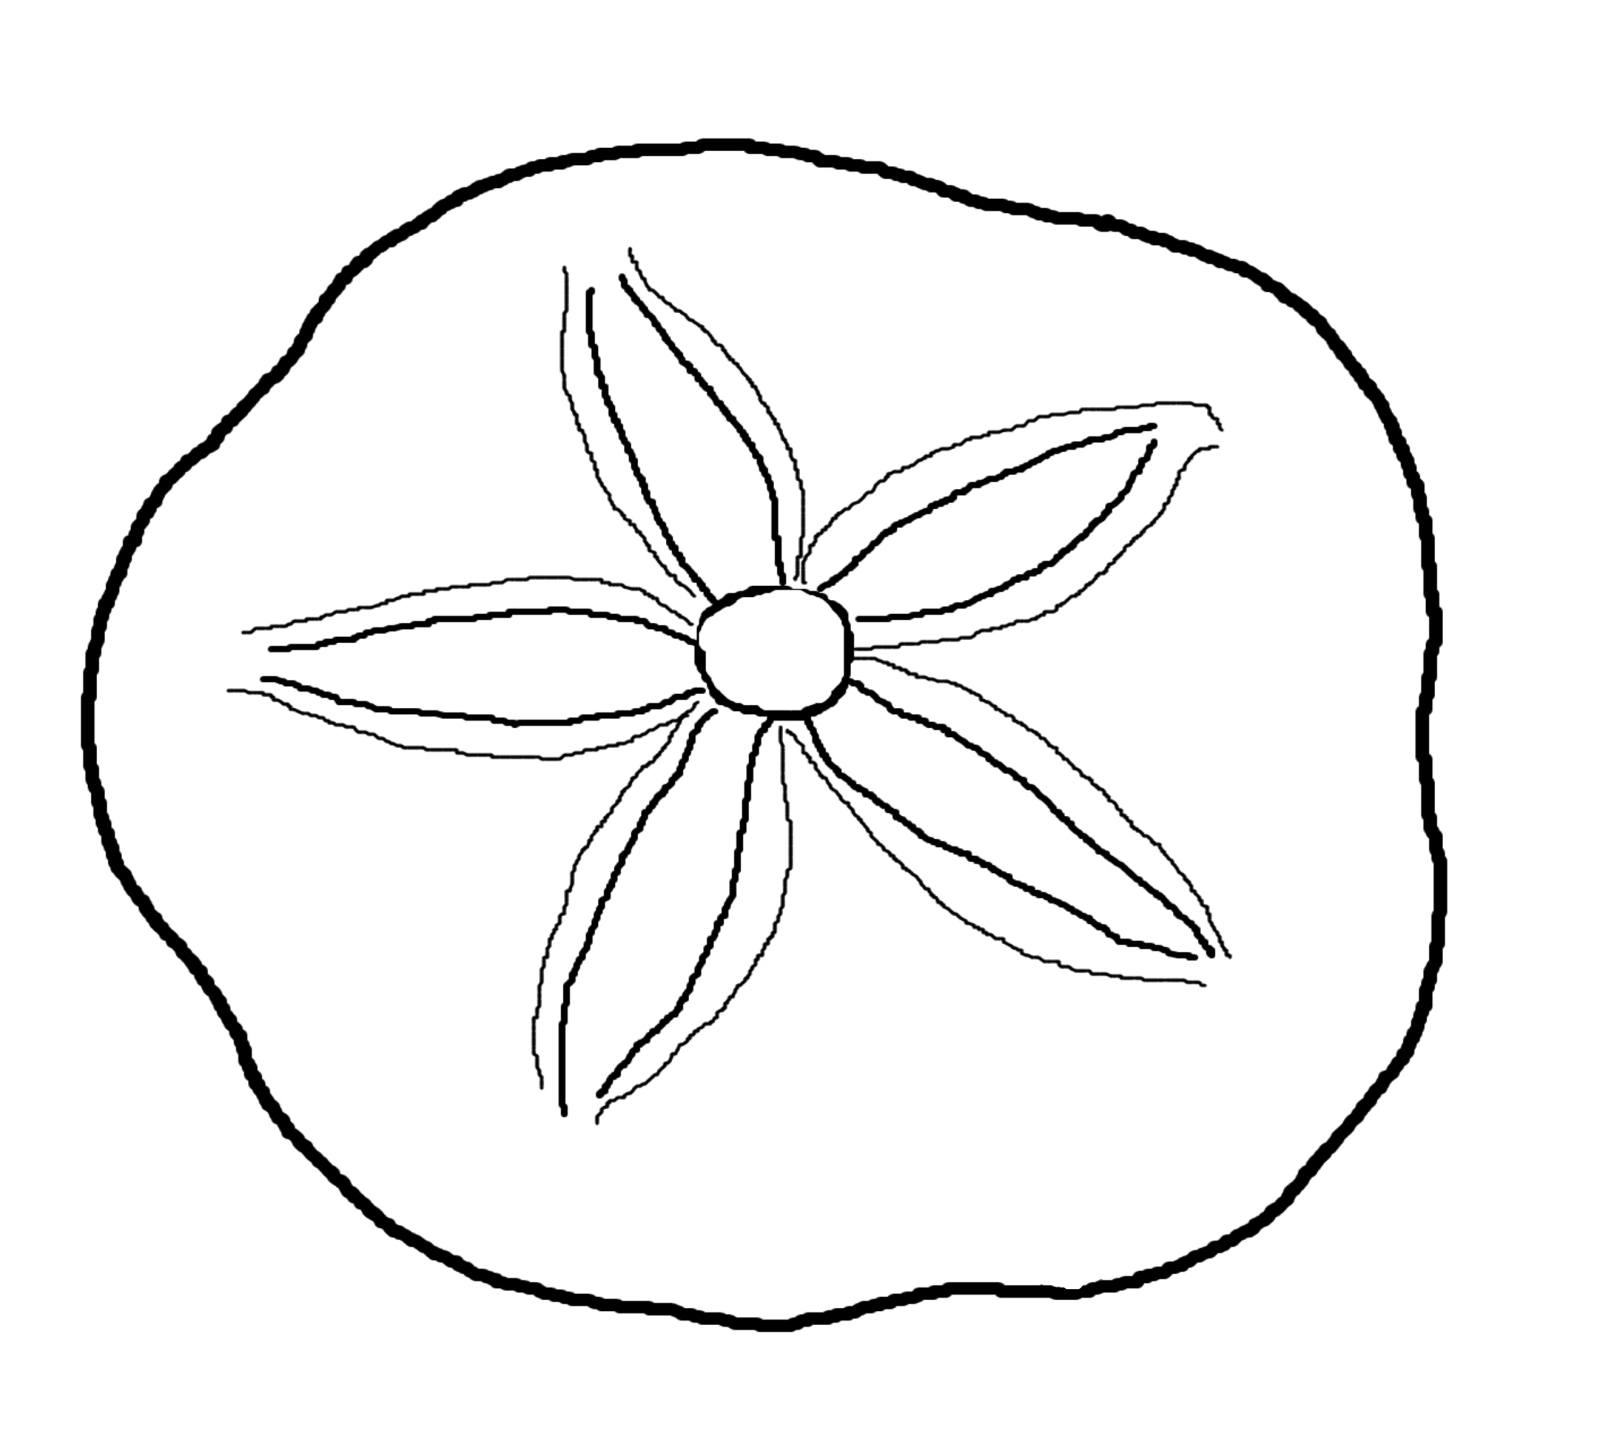 Sand Dollar Clipart Black And White   Clipart Panda   Free Clipart